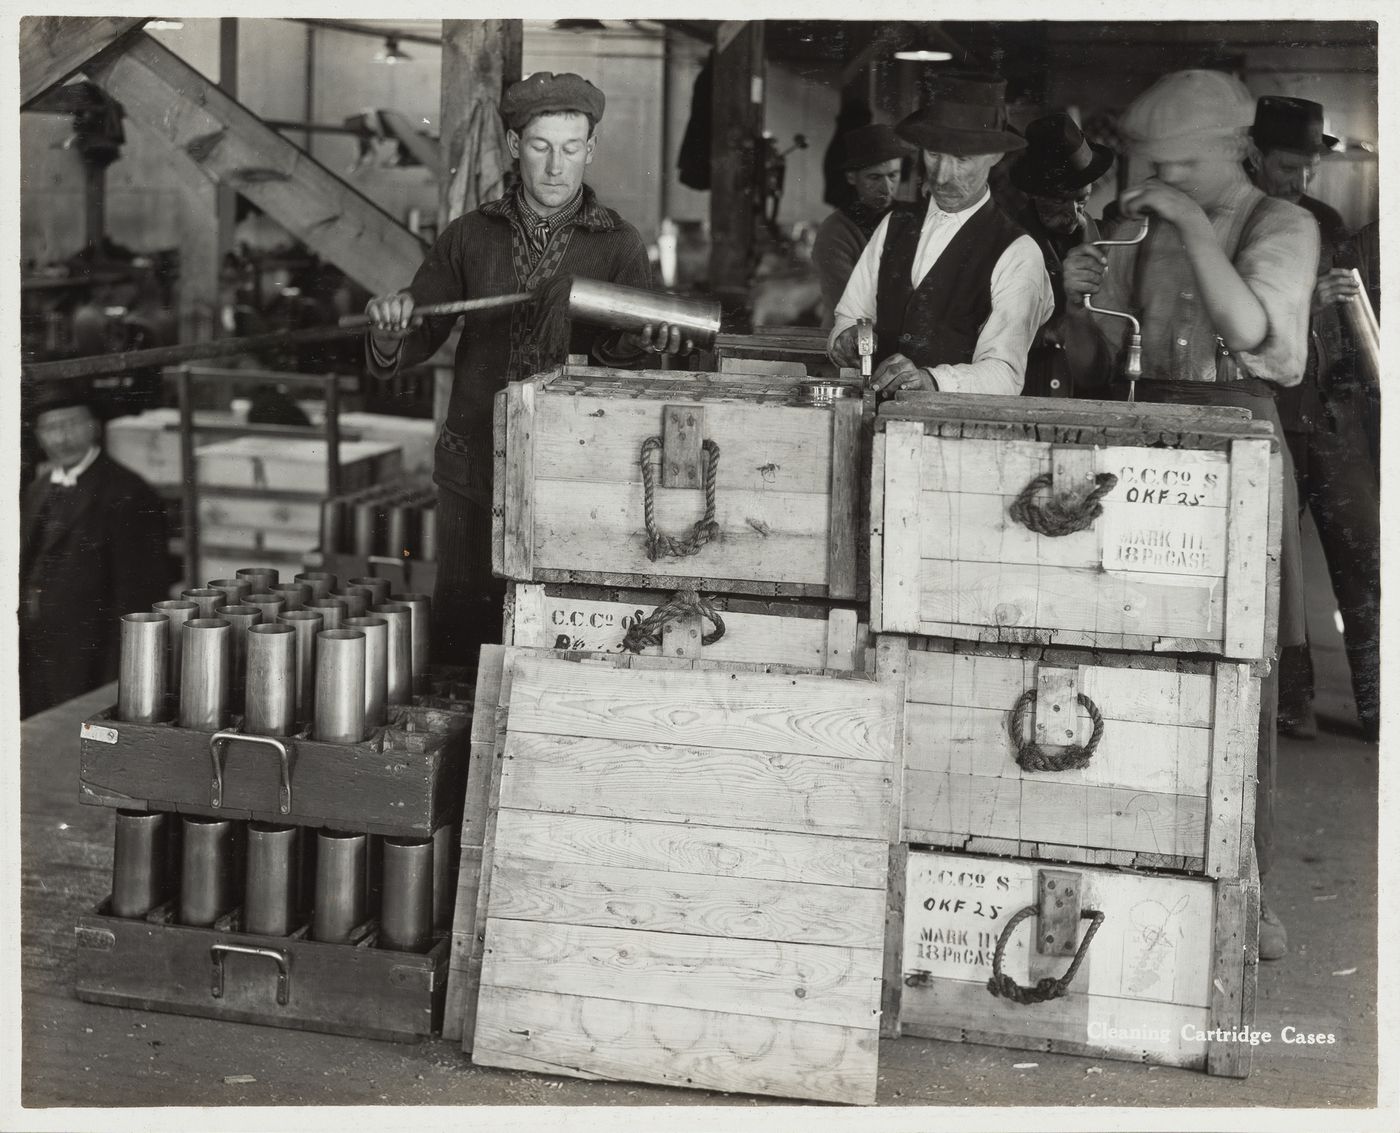 Interior view of workers cleaning cartridge cases at the Energite Explosives Plant No. 3, the Shell Loading Plant, Renfrew, Ontario, Canada